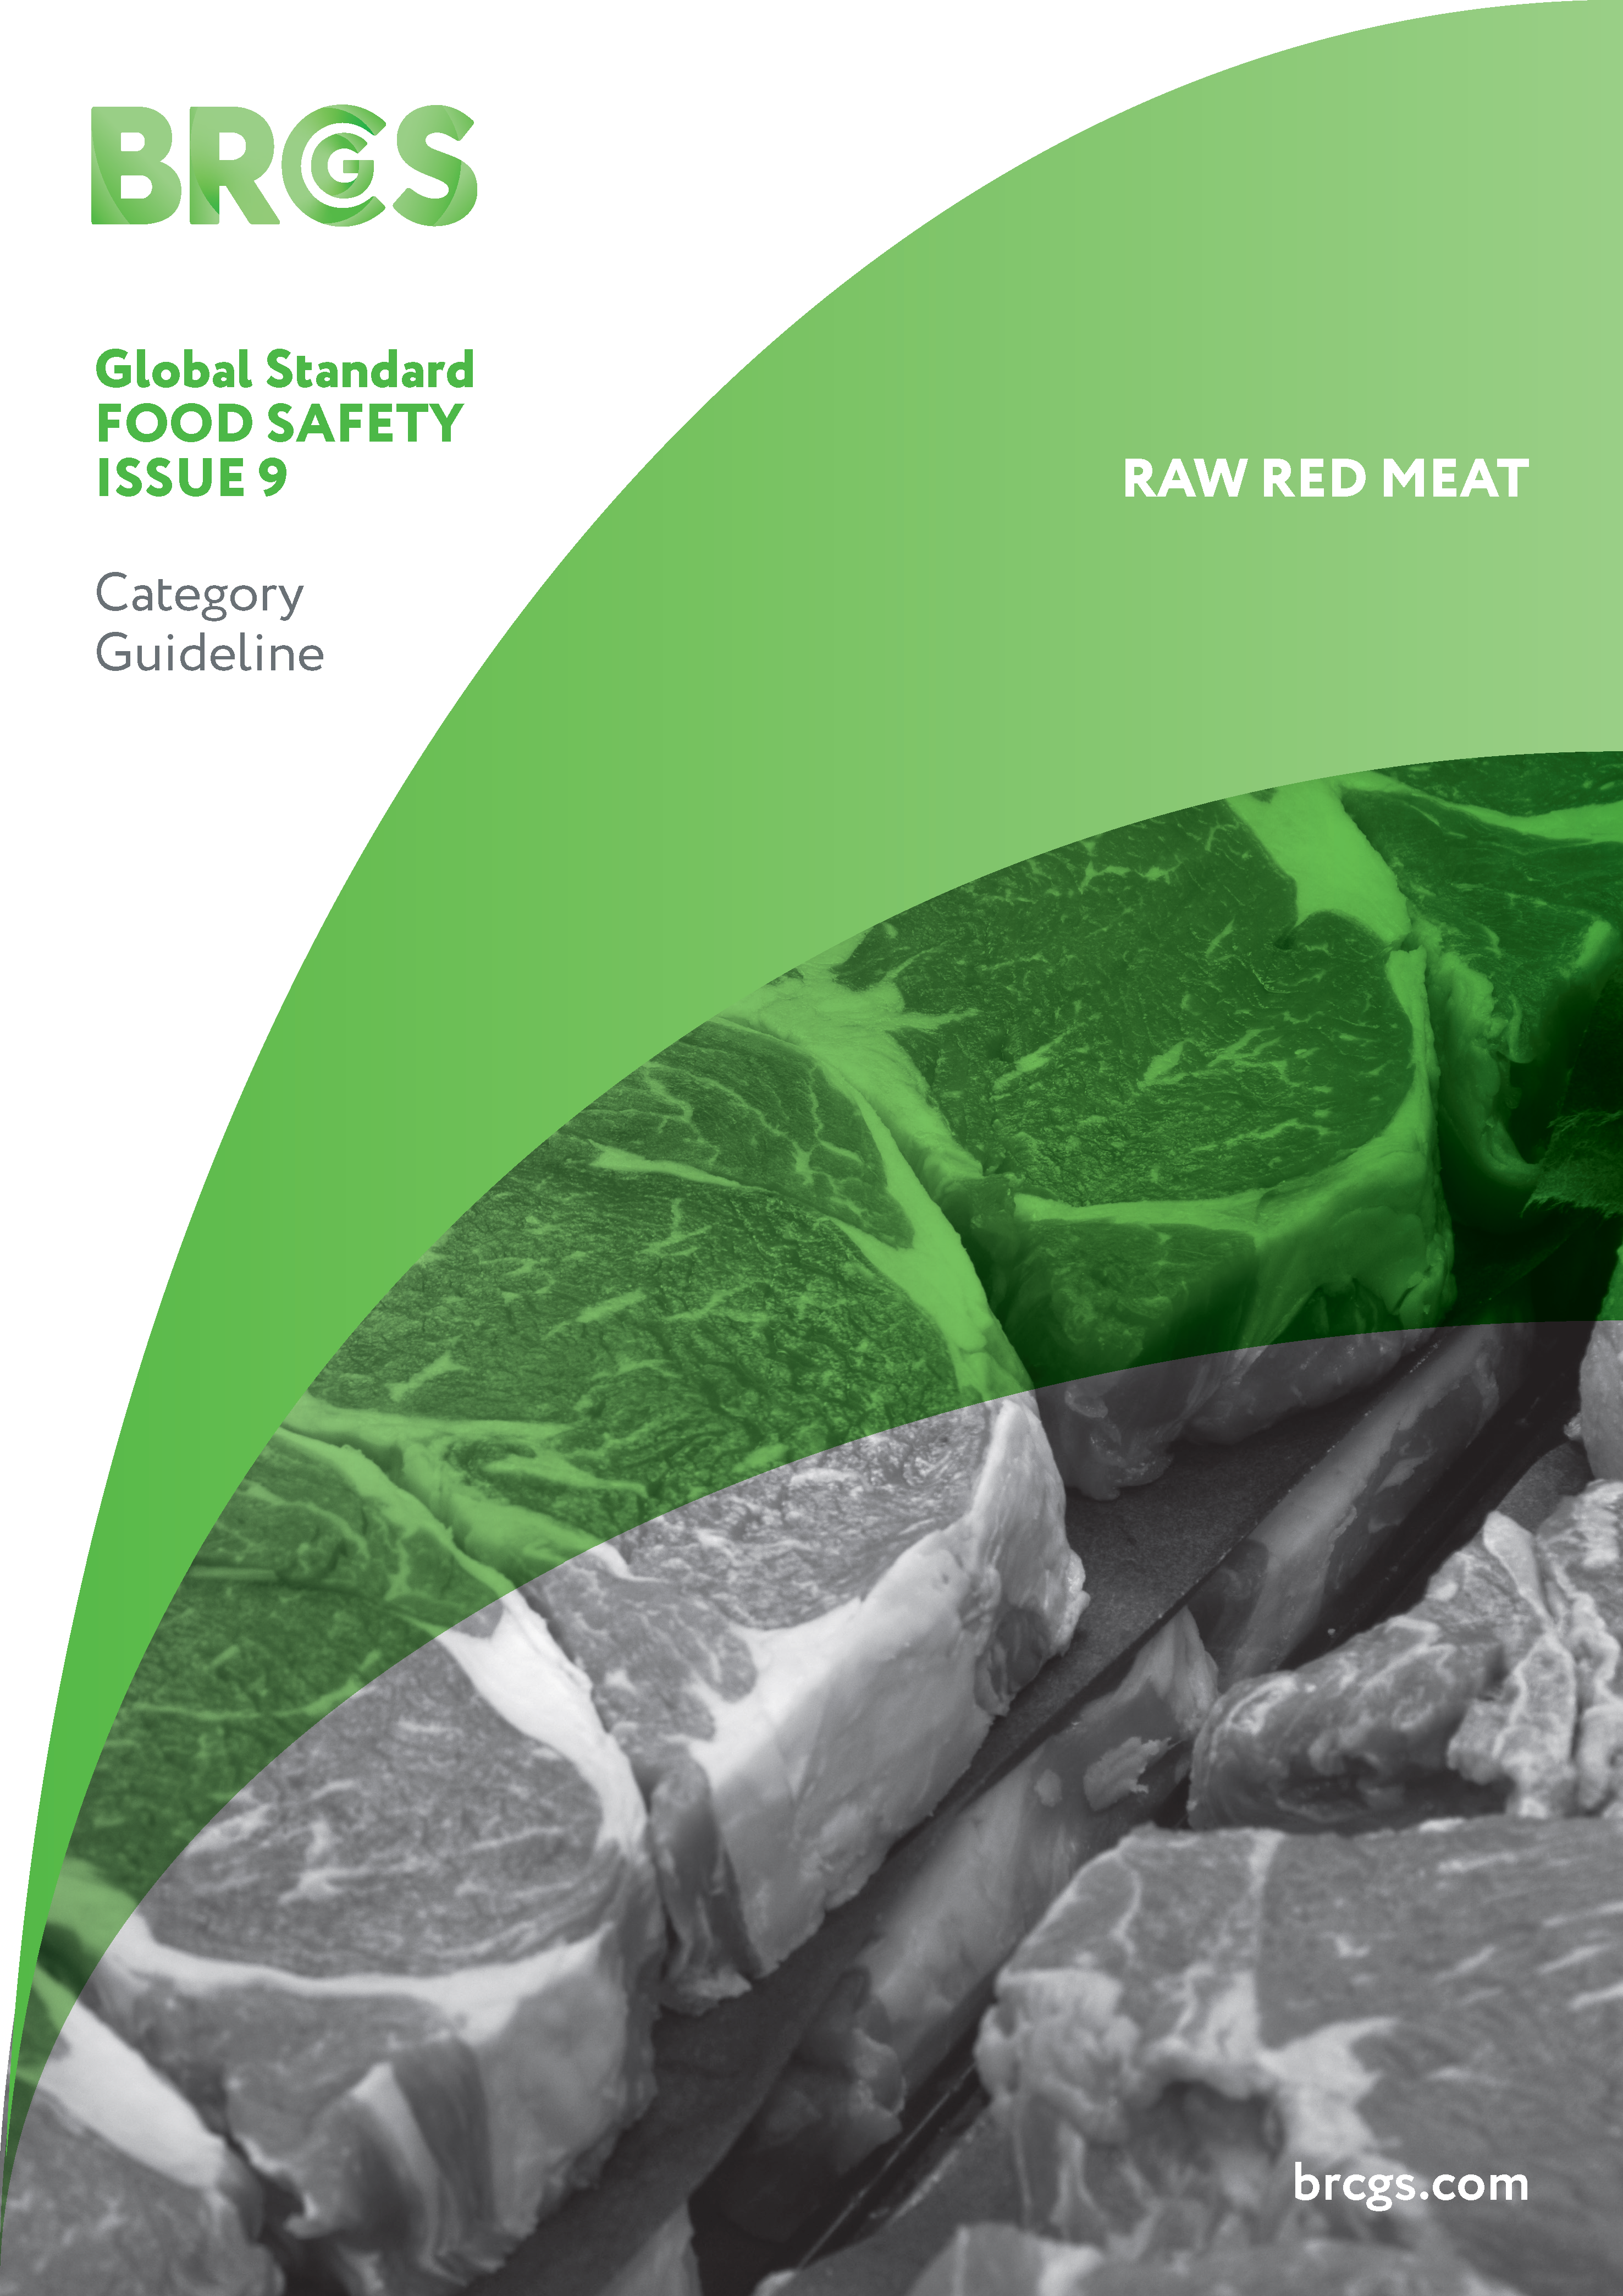 Guideline for Category 1 Raw Red Meat